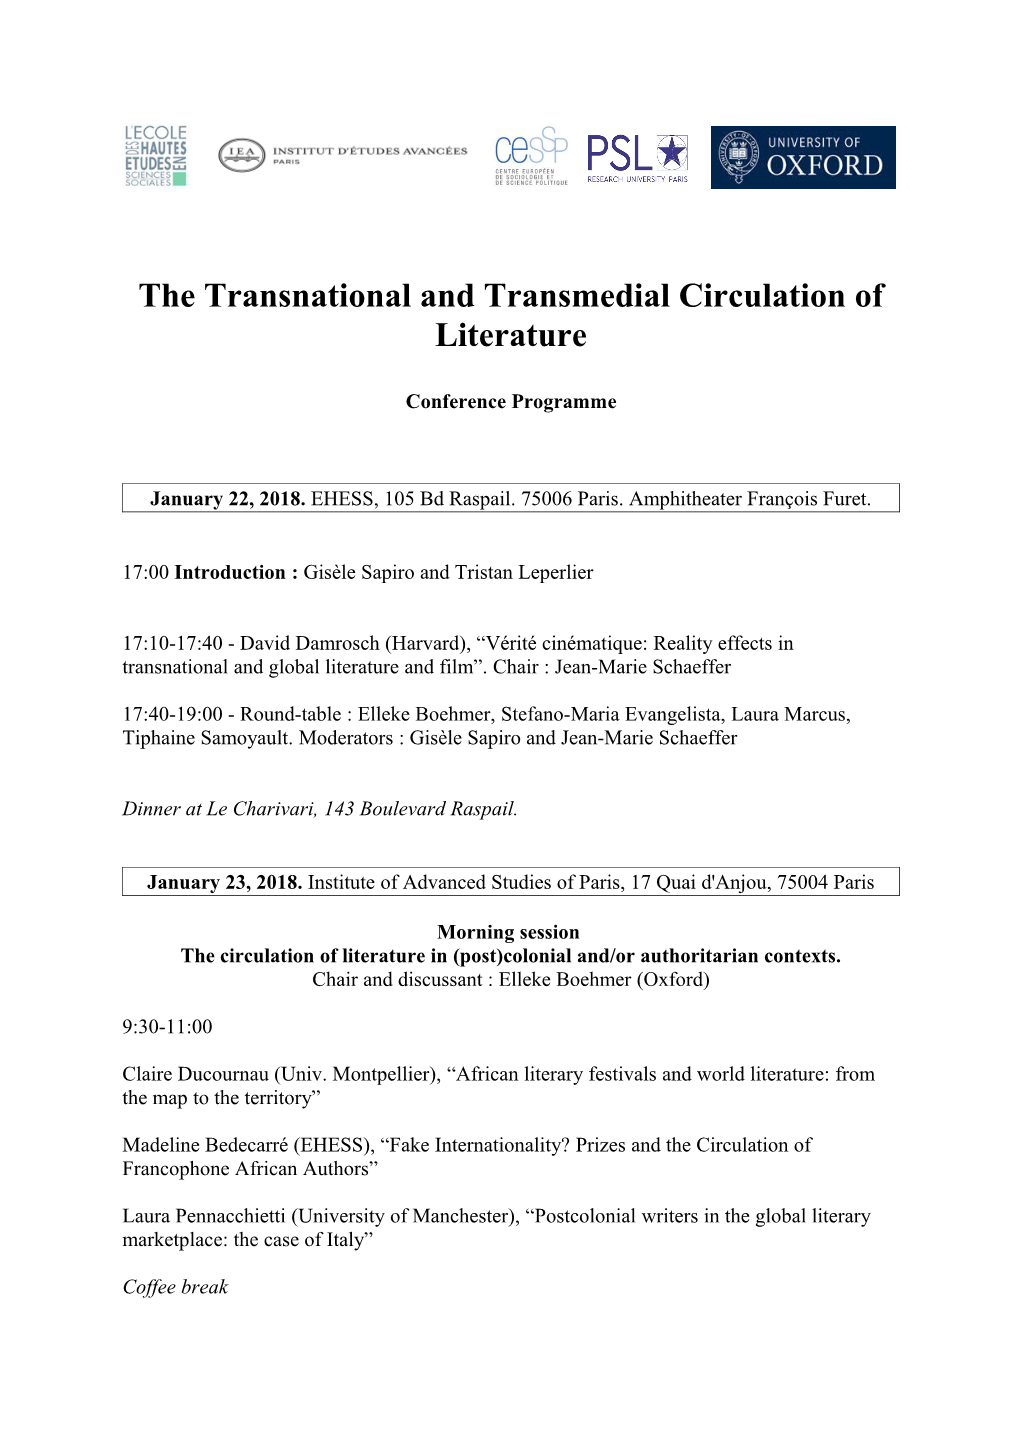 The Transnational and Transmedial Circulation of Literature